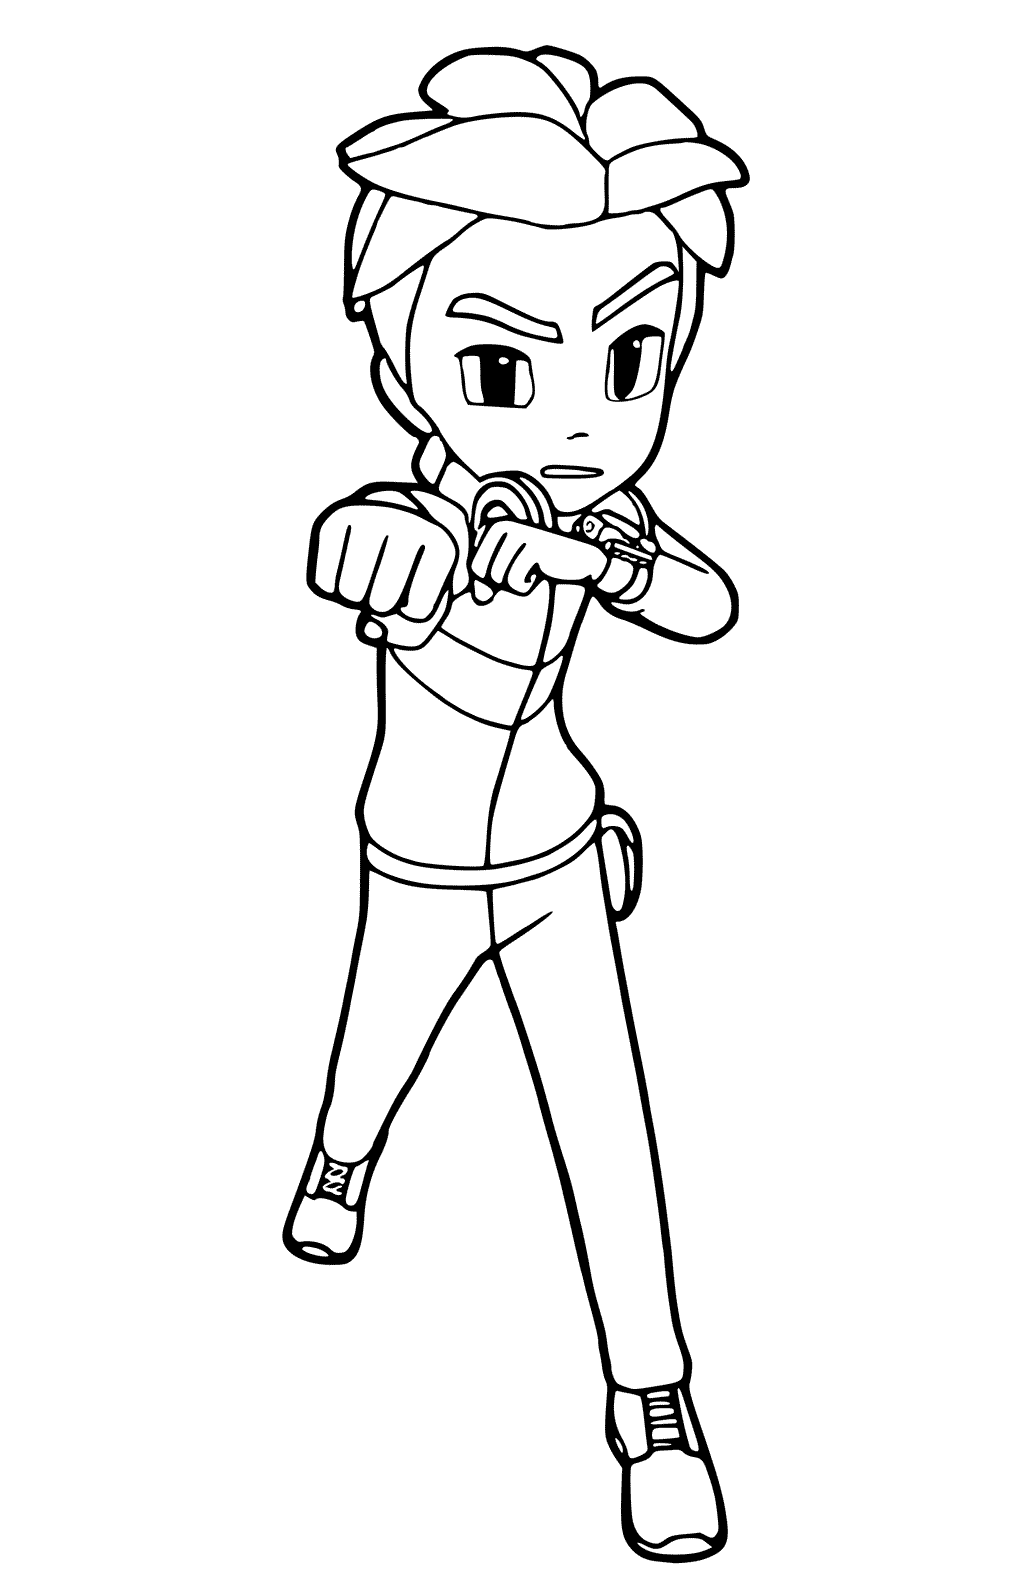 Dylan from Tobot Coloring Page